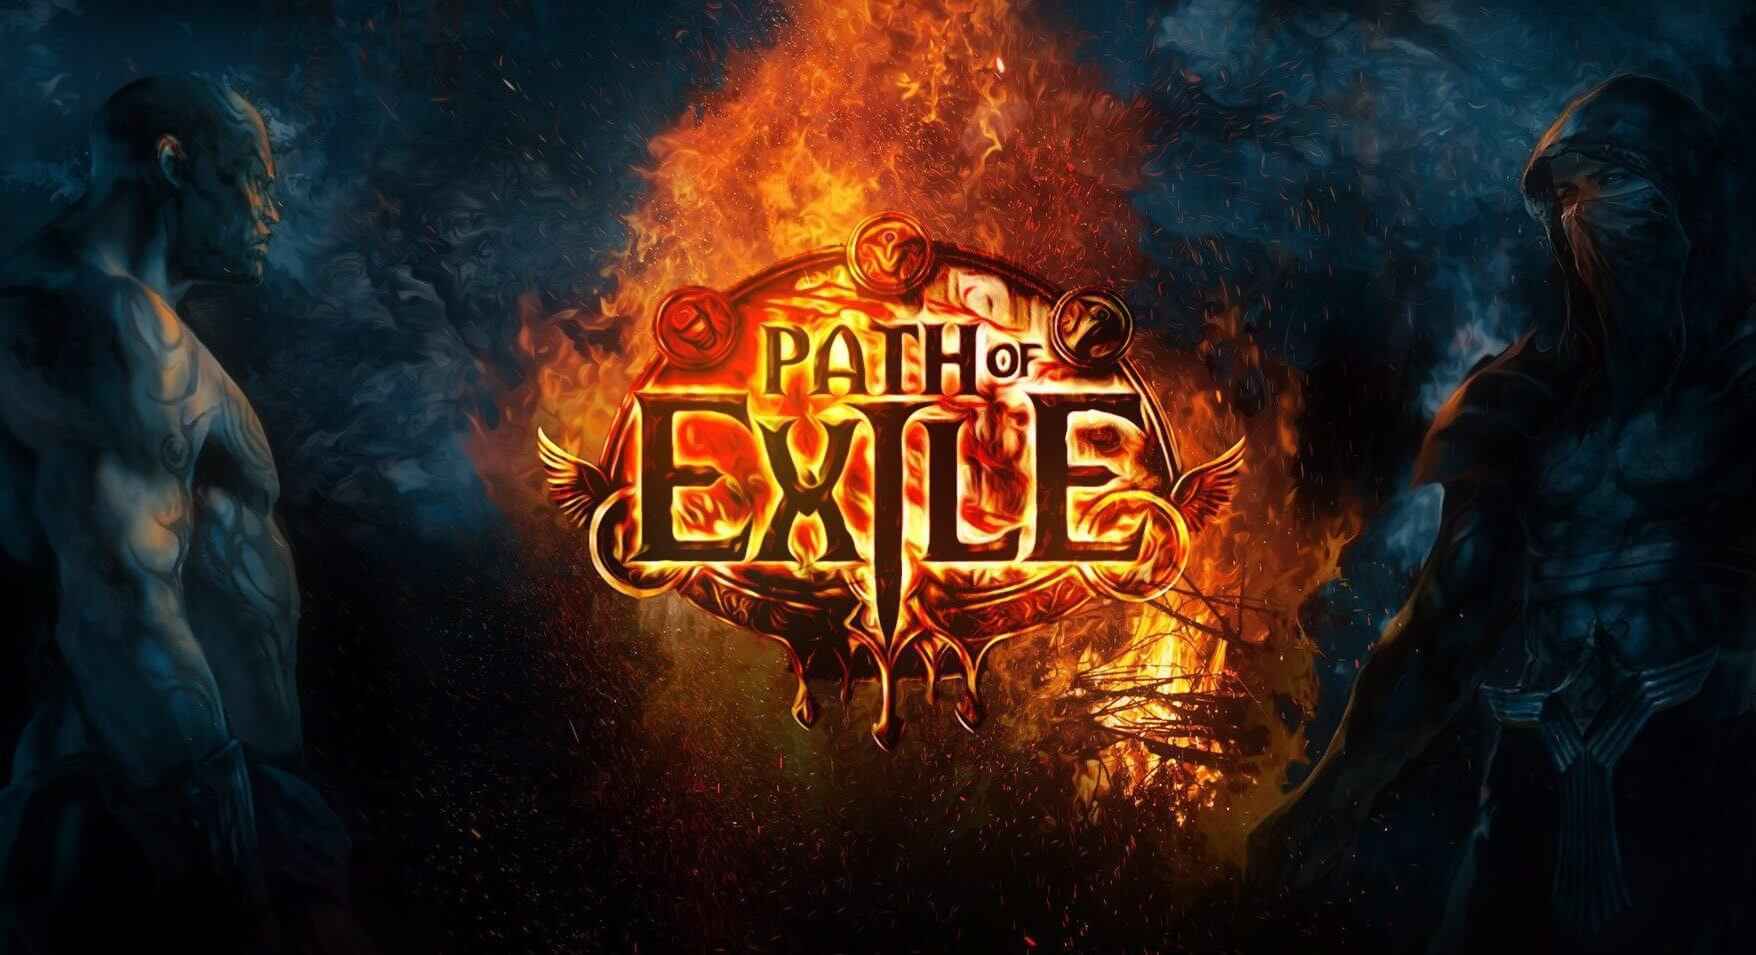 Path of Exile Update 1.41 (3.10.0D) Now Available, Full Patch Notes Inside